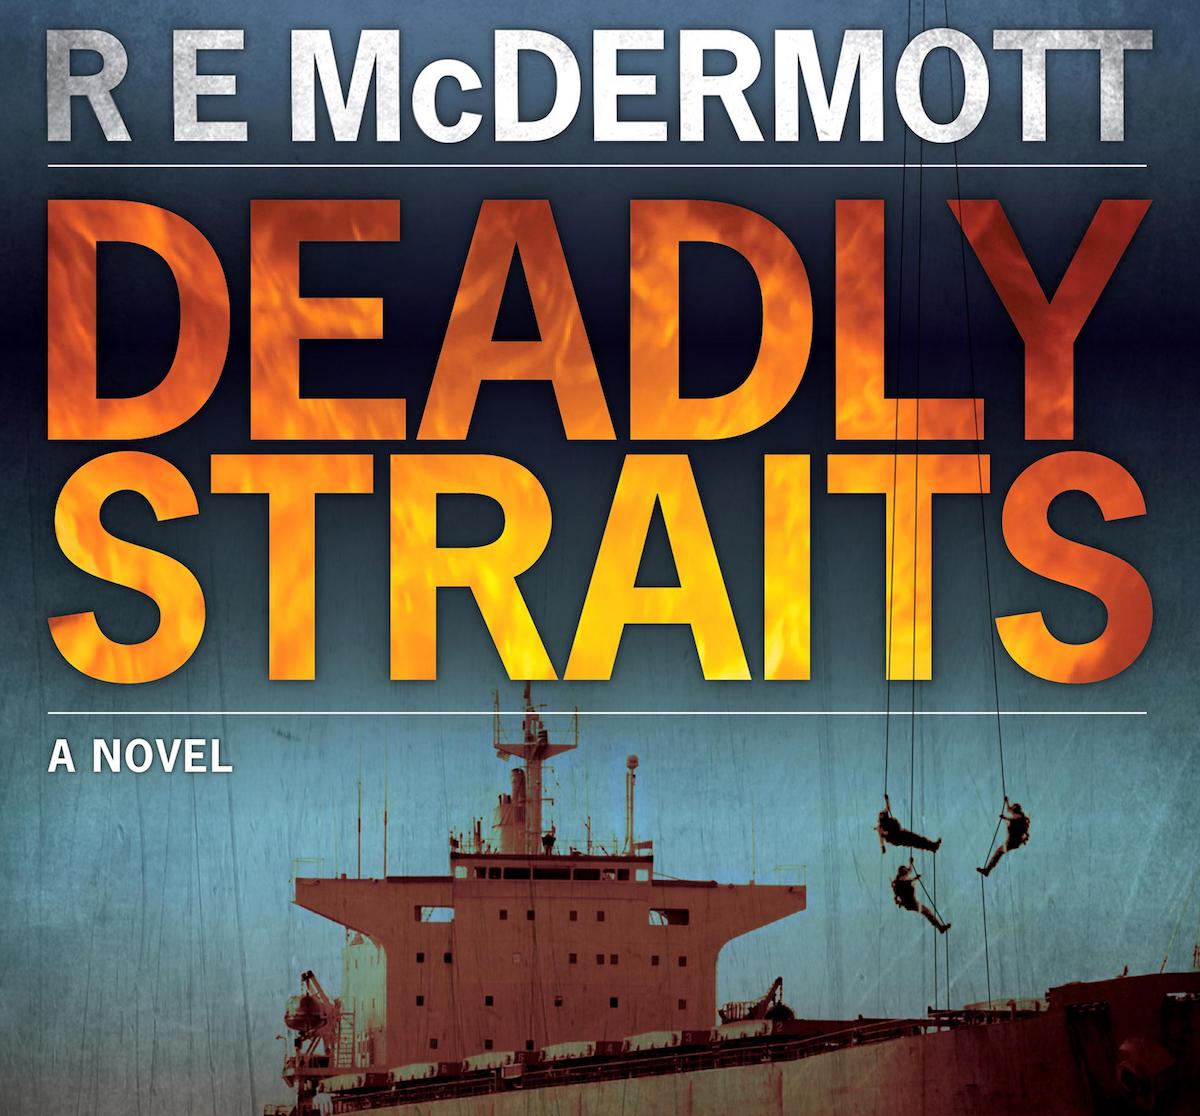 Deadly Straights by R.E. McDermott